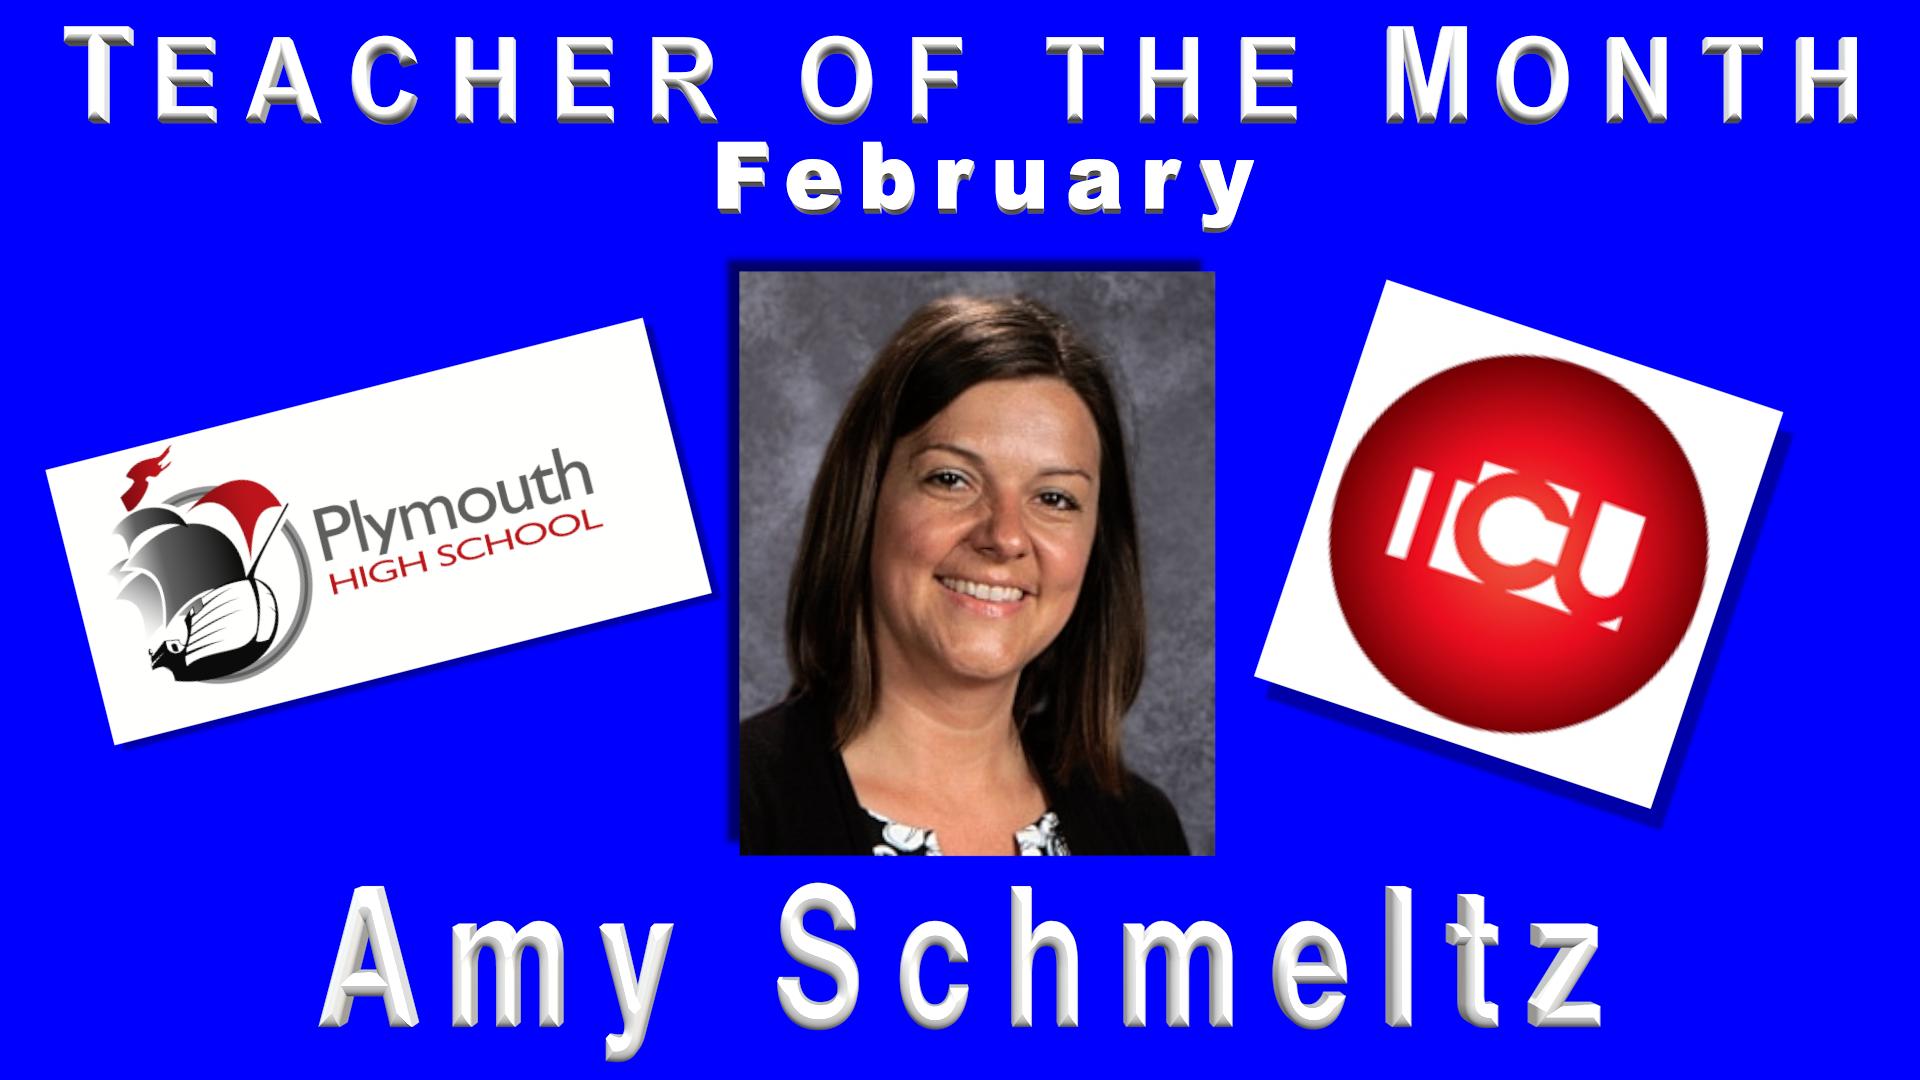 Teacher of the Month February Amy Schmeltz with Plymouth High School and Teachers Credit Union Logo on a blue background.